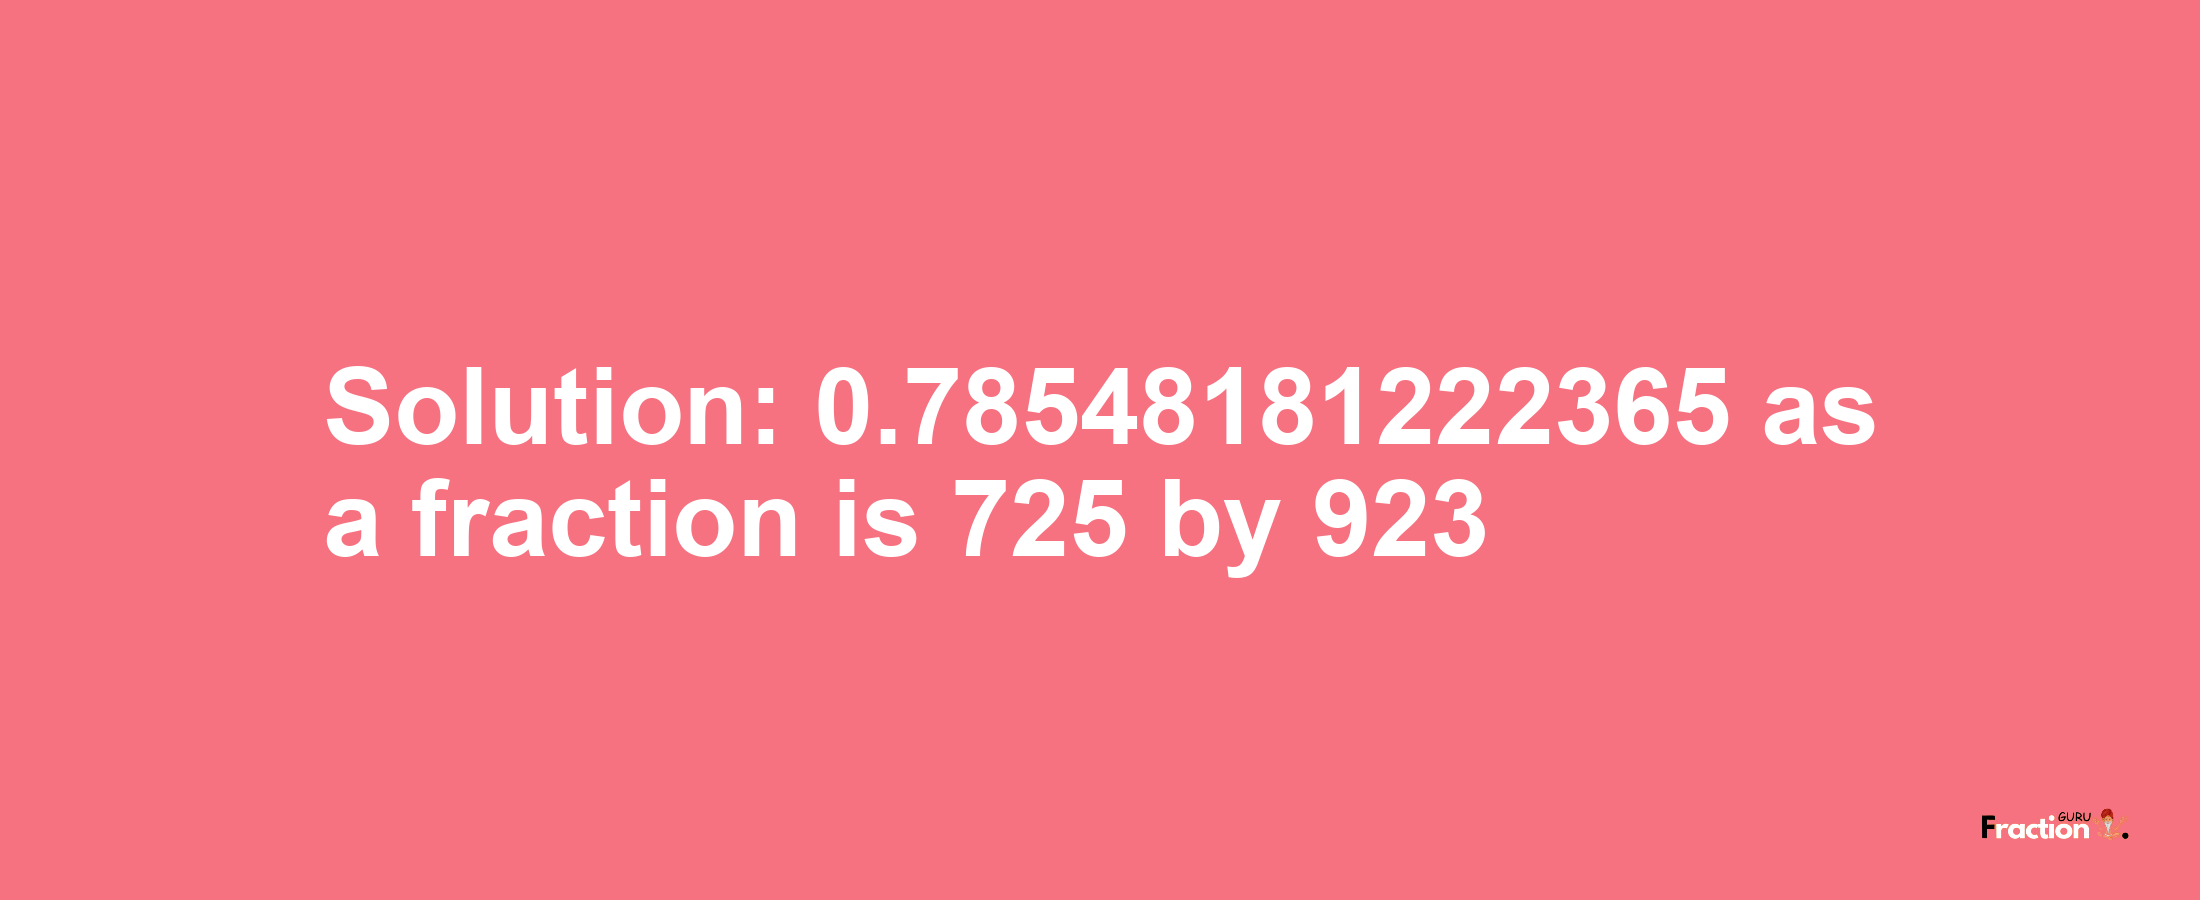 Solution:0.78548181222365 as a fraction is 725/923